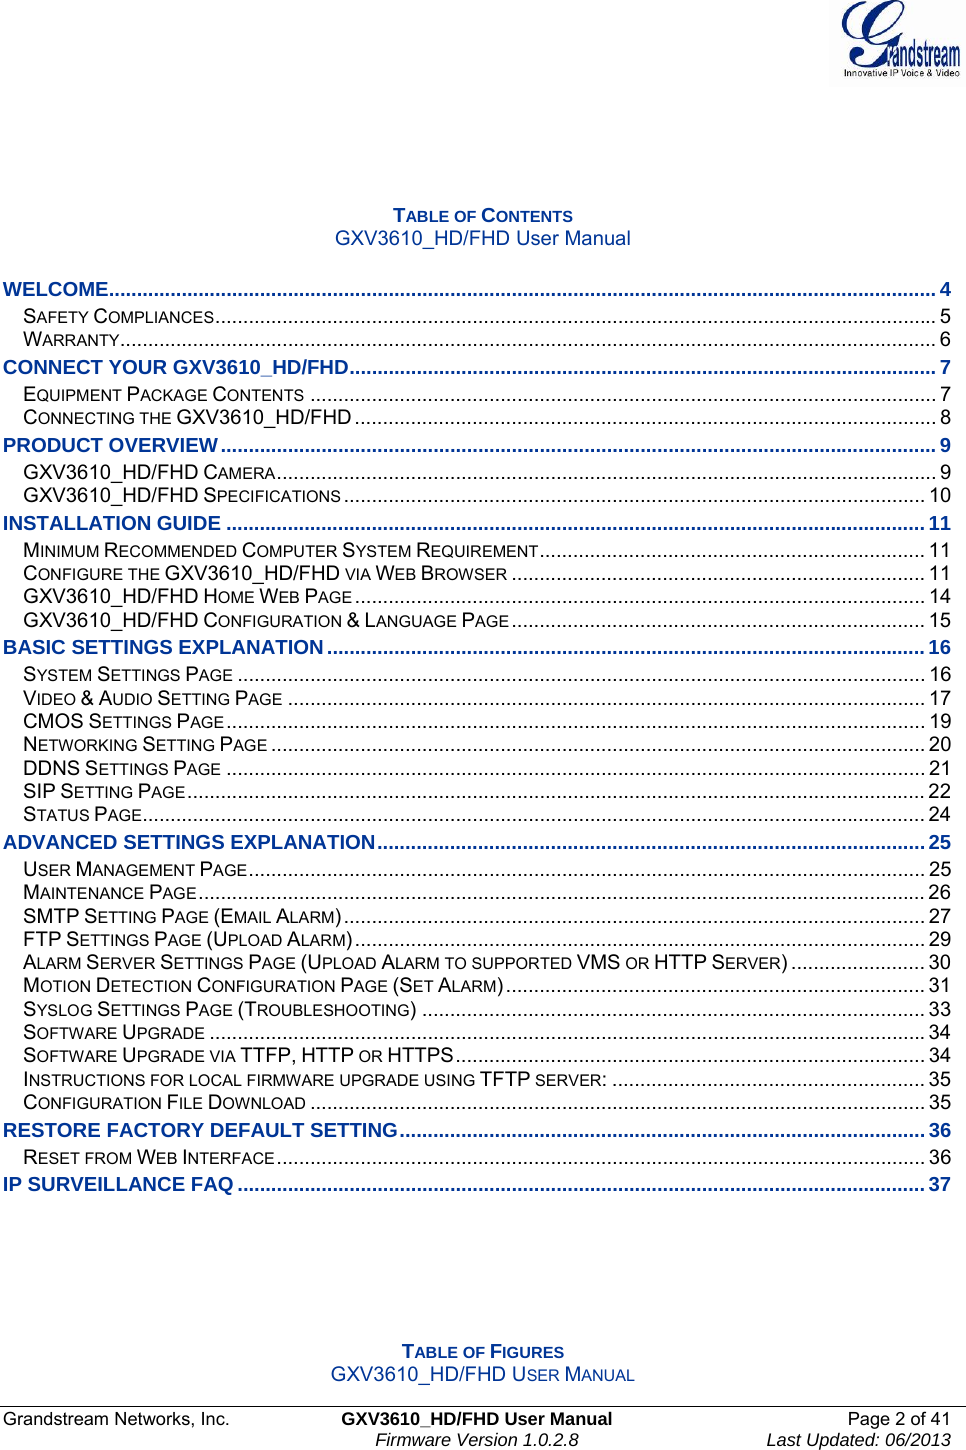  Grandstream Networks, Inc.  GXV3610_HD/FHD User Manual  Page 2 of 41    Firmware Version 1.0.2.8  Last Updated: 06/2013      TABLE OF CONTENTS GXV3610_HD/FHD User Manual  WELCOME.................................................................................................................................................... 4SAFETY COMPLIANCES................................................................................................................................. 5WARRANTY.................................................................................................................................................. 6CONNECT YOUR GXV3610_HD/FHD......................................................................................................... 7EQUIPMENT PACKAGE CONTENTS ................................................................................................................ 7CONNECTING THE GXV3610_HD/FHD ........................................................................................................ 8PRODUCT OVERVIEW................................................................................................................................ 9GXV3610_HD/FHD CAMERA...................................................................................................................... 9GXV3610_HD/FHD SPECIFICATIONS ........................................................................................................ 10INSTALLATION GUIDE .............................................................................................................................11MINIMUM RECOMMENDED COMPUTER SYSTEM REQUIREMENT..................................................................... 11CONFIGURE THE GXV3610_HD/FHD VIA WEB BROWSER .......................................................................... 11GXV3610_HD/FHD HOME WEB PAGE ...................................................................................................... 14GXV3610_HD/FHD CONFIGURATION &amp; LANGUAGE PAGE .......................................................................... 15BASIC SETTINGS EXPLANATION........................................................................................................... 16SYSTEM SETTINGS PAGE ........................................................................................................................... 16VIDEO &amp; AUDIO SETTING PAGE .................................................................................................................. 17CMOS SETTINGS PAGE ............................................................................................................................. 19NETWORKING SETTING PAGE ..................................................................................................................... 20DDNS SETTINGS PAGE ............................................................................................................................. 21SIP SETTING PAGE.................................................................................................................................... 22STATUS PAGE............................................................................................................................................ 24ADVANCED SETTINGS EXPLANATION..................................................................................................25USER MANAGEMENT PAGE......................................................................................................................... 25MAINTENANCE PAGE.................................................................................................................................. 26SMTP SETTING PAGE (EMAIL ALARM)........................................................................................................ 27FTP SETTINGS PAGE (UPLOAD ALARM)...................................................................................................... 29ALARM SERVER SETTINGS PAGE (UPLOAD ALARM TO SUPPORTED VMS OR HTTP SERVER) ........................ 30MOTION DETECTION CONFIGURATION PAGE (SET ALARM)........................................................................... 31SYSLOG SETTINGS PAGE (TROUBLESHOOTING) .......................................................................................... 33SOFTWARE UPGRADE ................................................................................................................................34SOFTWARE UPGRADE VIA TTFP, HTTP OR HTTPS.................................................................................... 34INSTRUCTIONS FOR LOCAL FIRMWARE UPGRADE USING TFTP SERVER: ........................................................ 35CONFIGURATION FILE DOWNLOAD .............................................................................................................. 35RESTORE FACTORY DEFAULT SETTING..............................................................................................36RESET FROM WEB INTERFACE.................................................................................................................... 36IP SURVEILLANCE FAQ ........................................................................................................................... 37      TABLE OF FIGURES GXV3610_HD/FHD USER MANUAL 